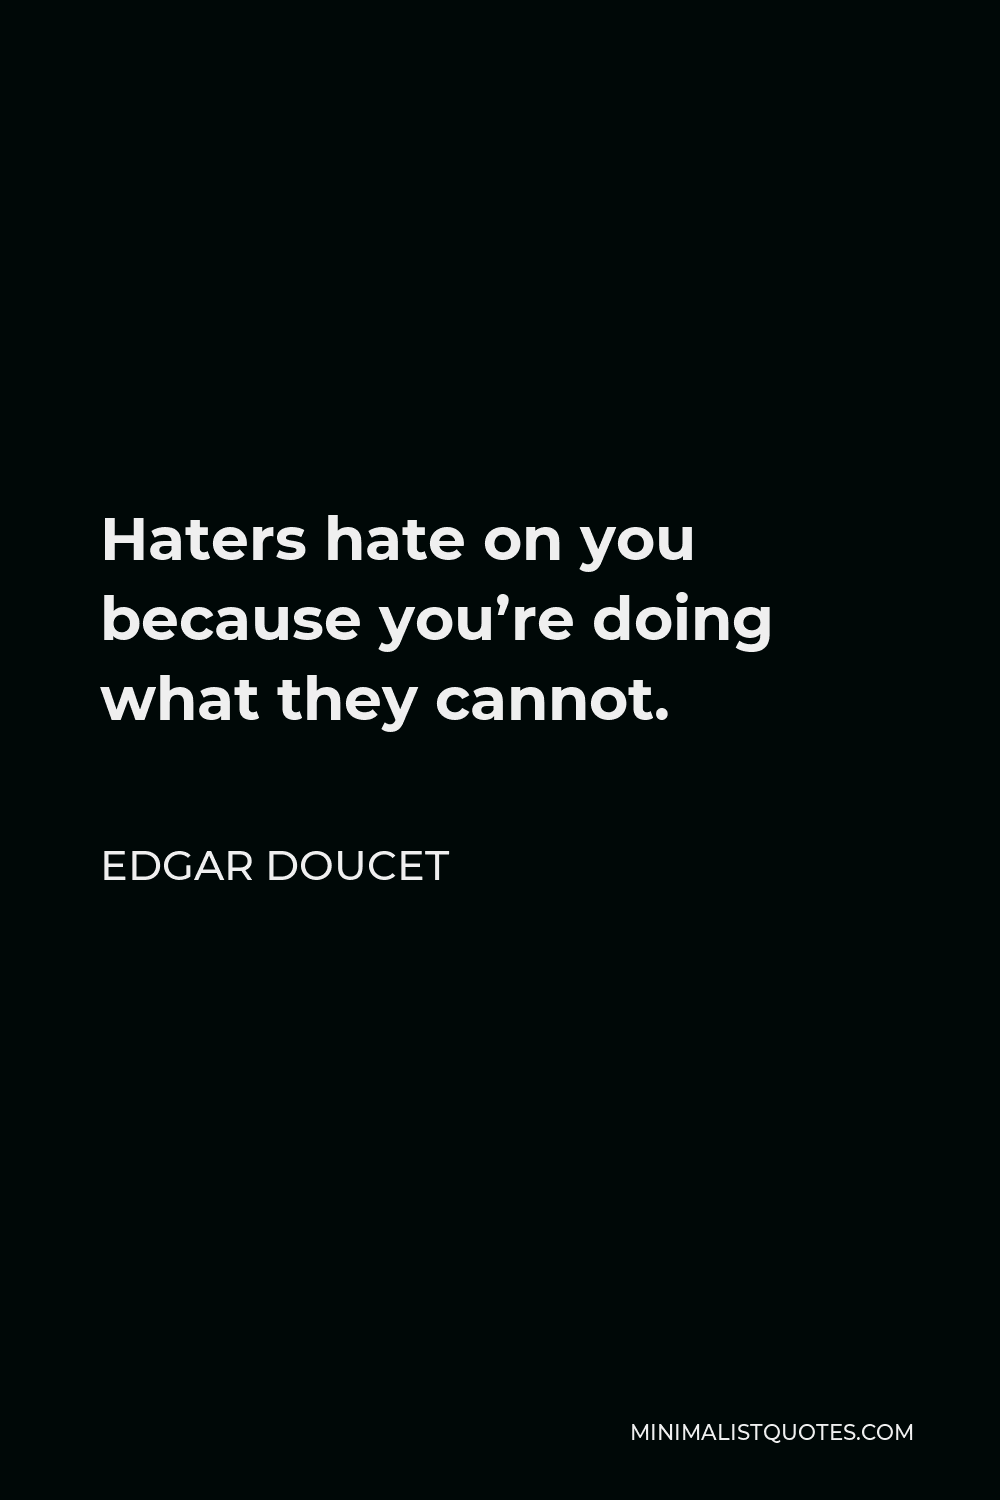 Edgar Doucet Quote - Haters hate on you because you’re doing what they cannot.